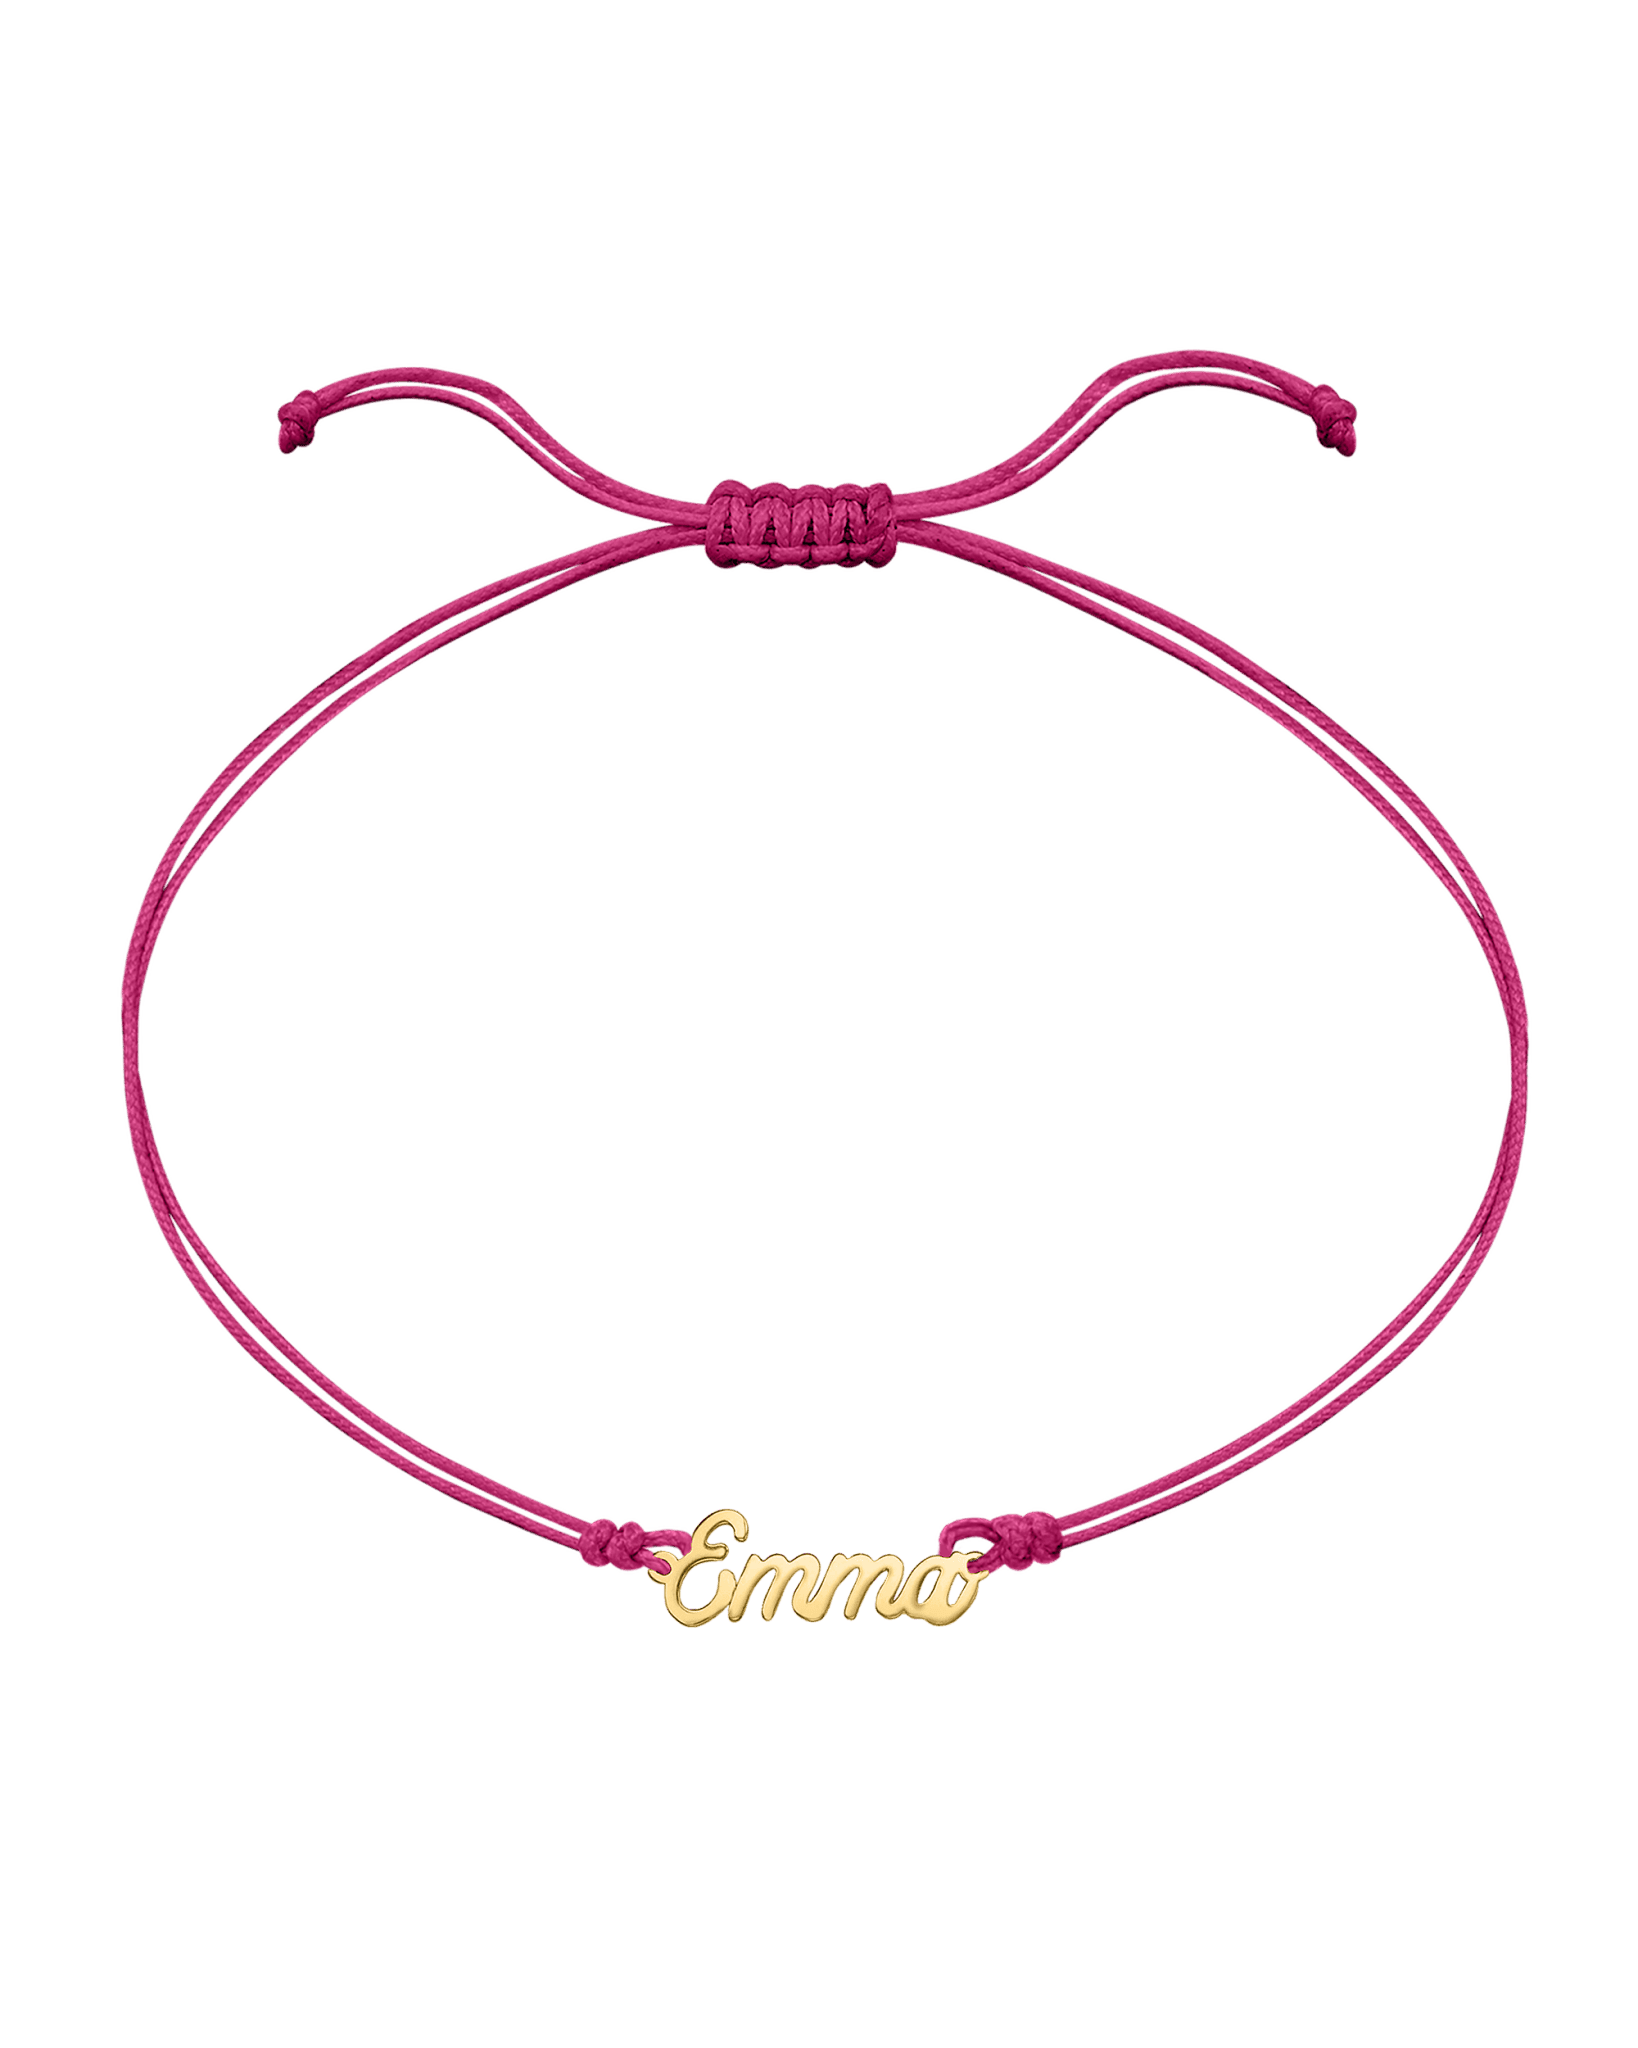 Name Plate String of Love - 14K Yellow Gold Bracelets 14K Solid Gold Pink 1 